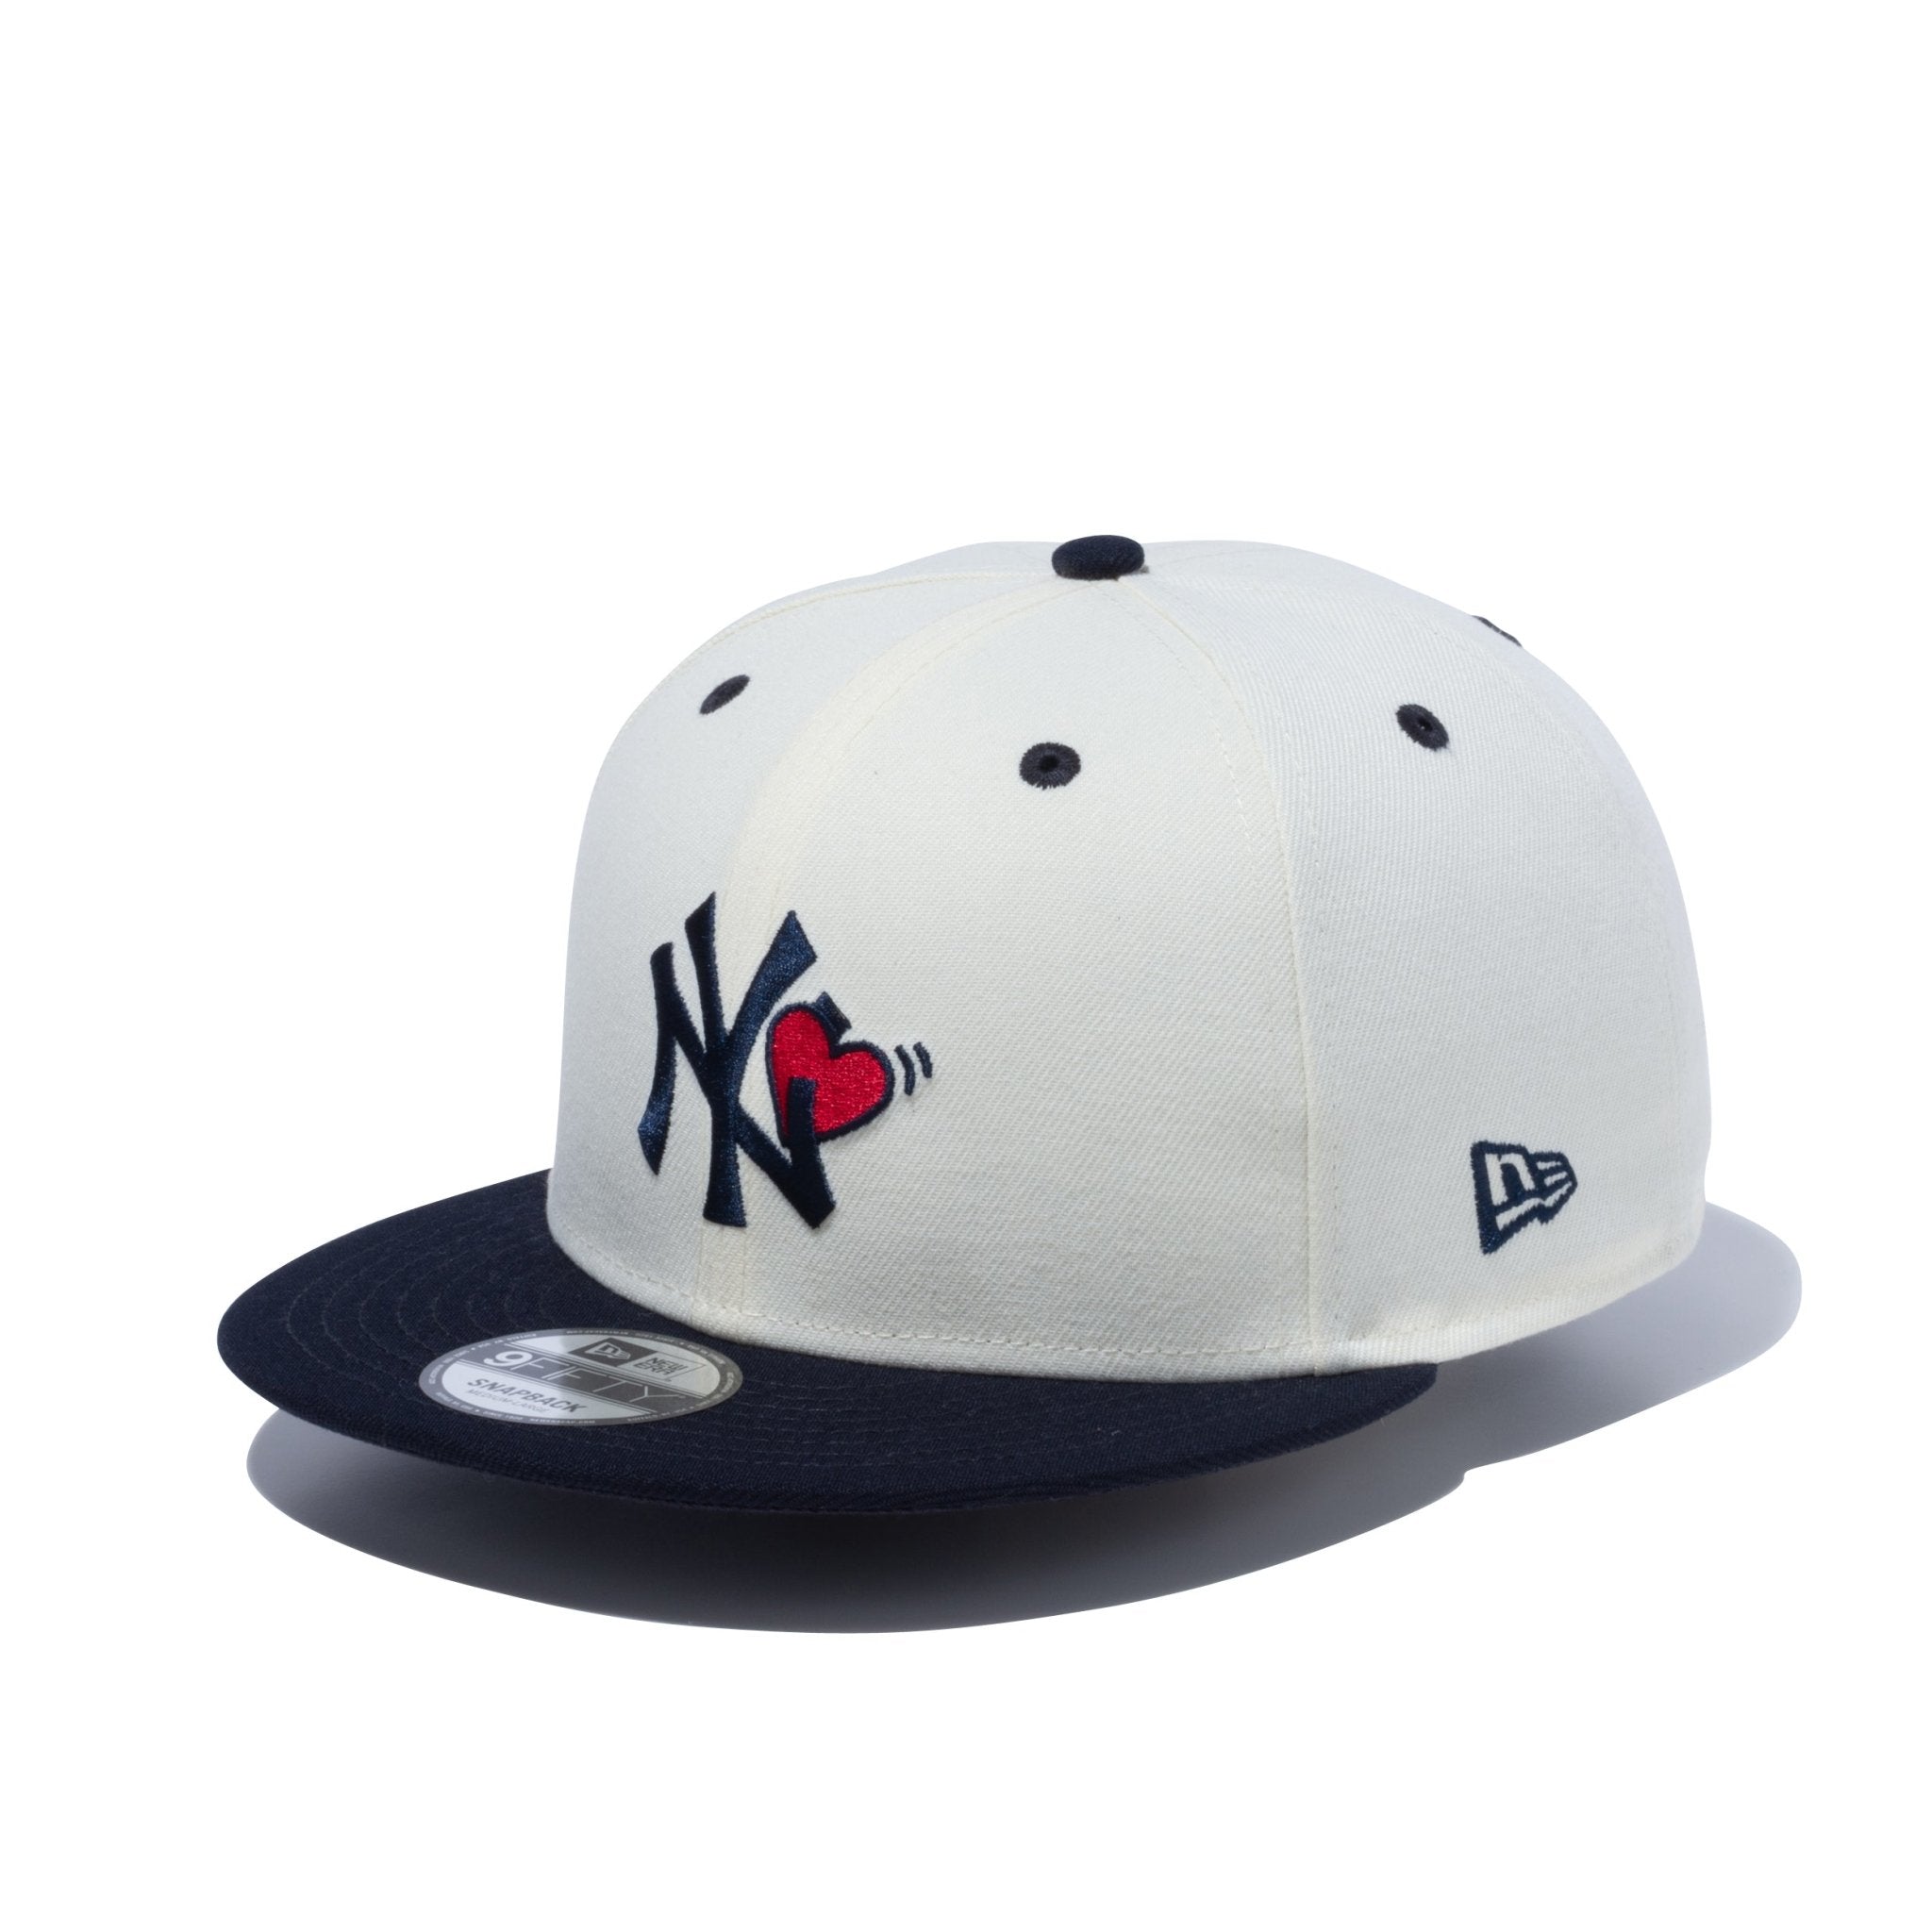 9FIFTY With Heart ニューヨーク・ヤンキース クロームホワイト ネイビーバイザー